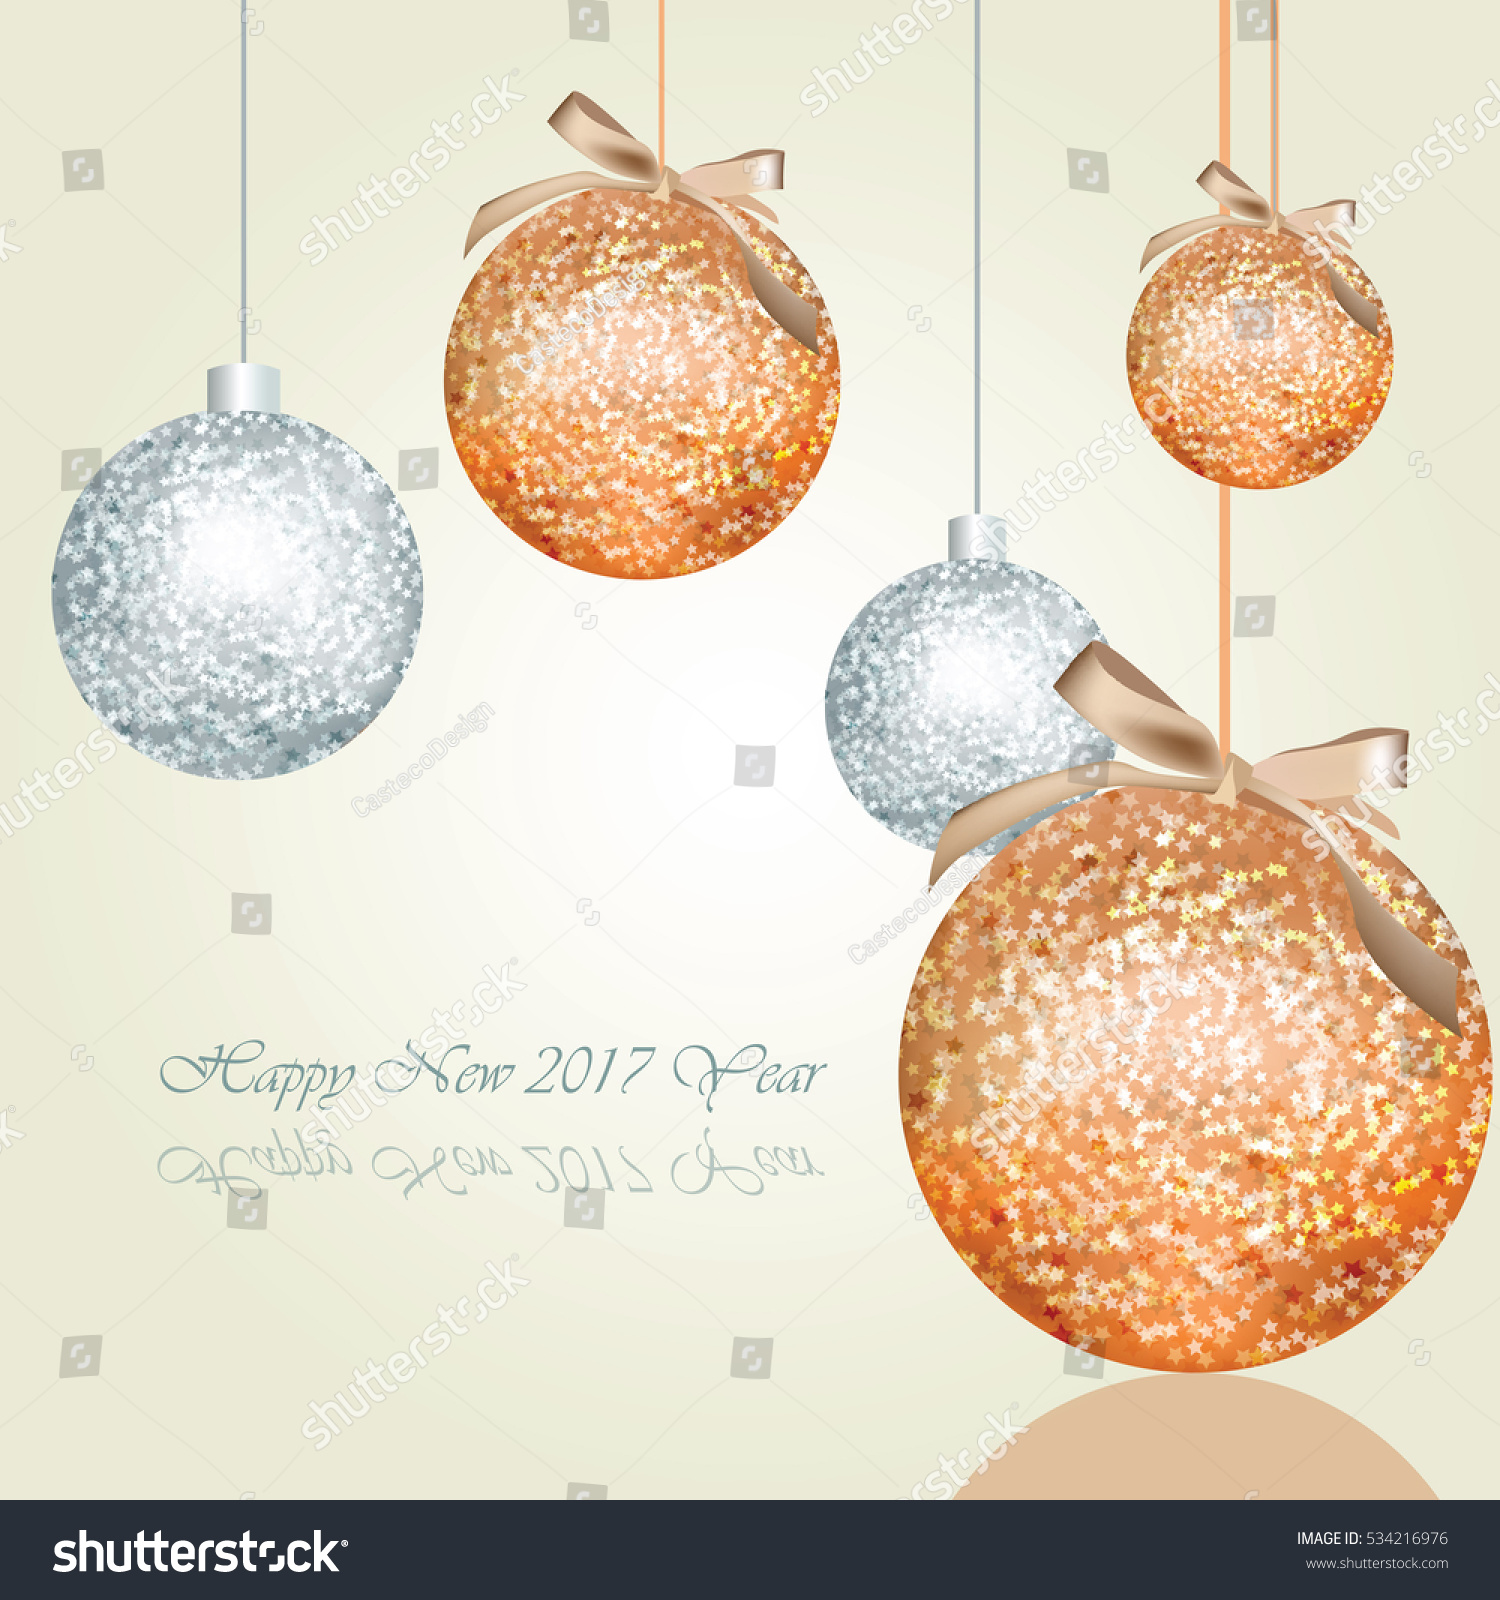 Happy New Year greeting card Vector with shiny Christmas balls Place for text Warm